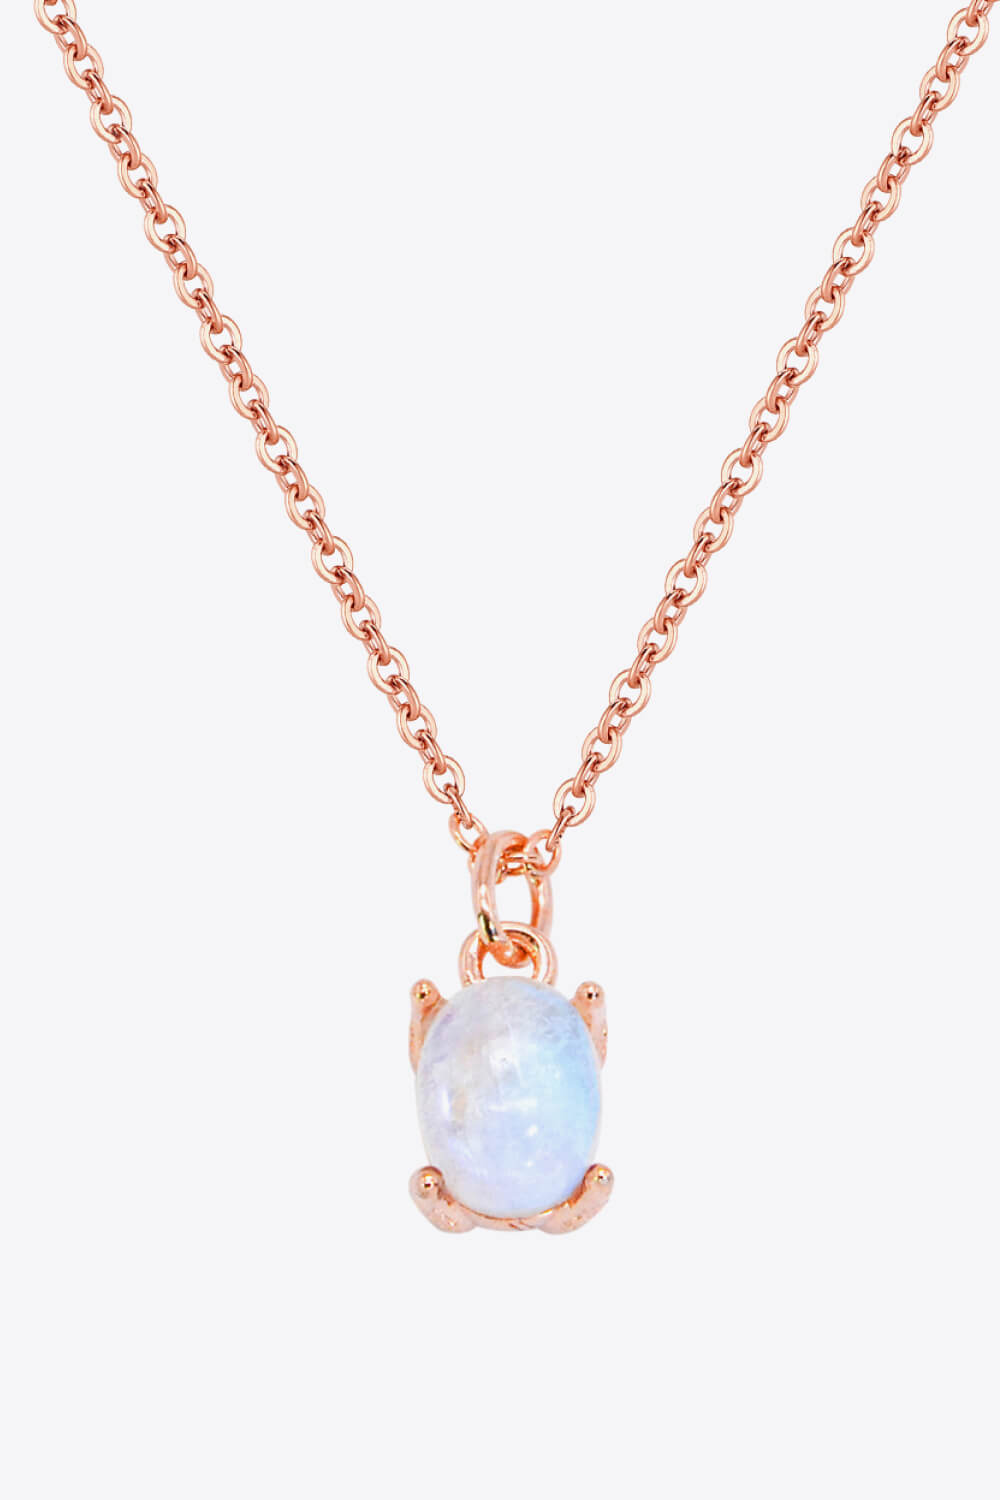 Natural 4-Prong Pendant Moonstone Necklace - Necklaces - FITGGINS